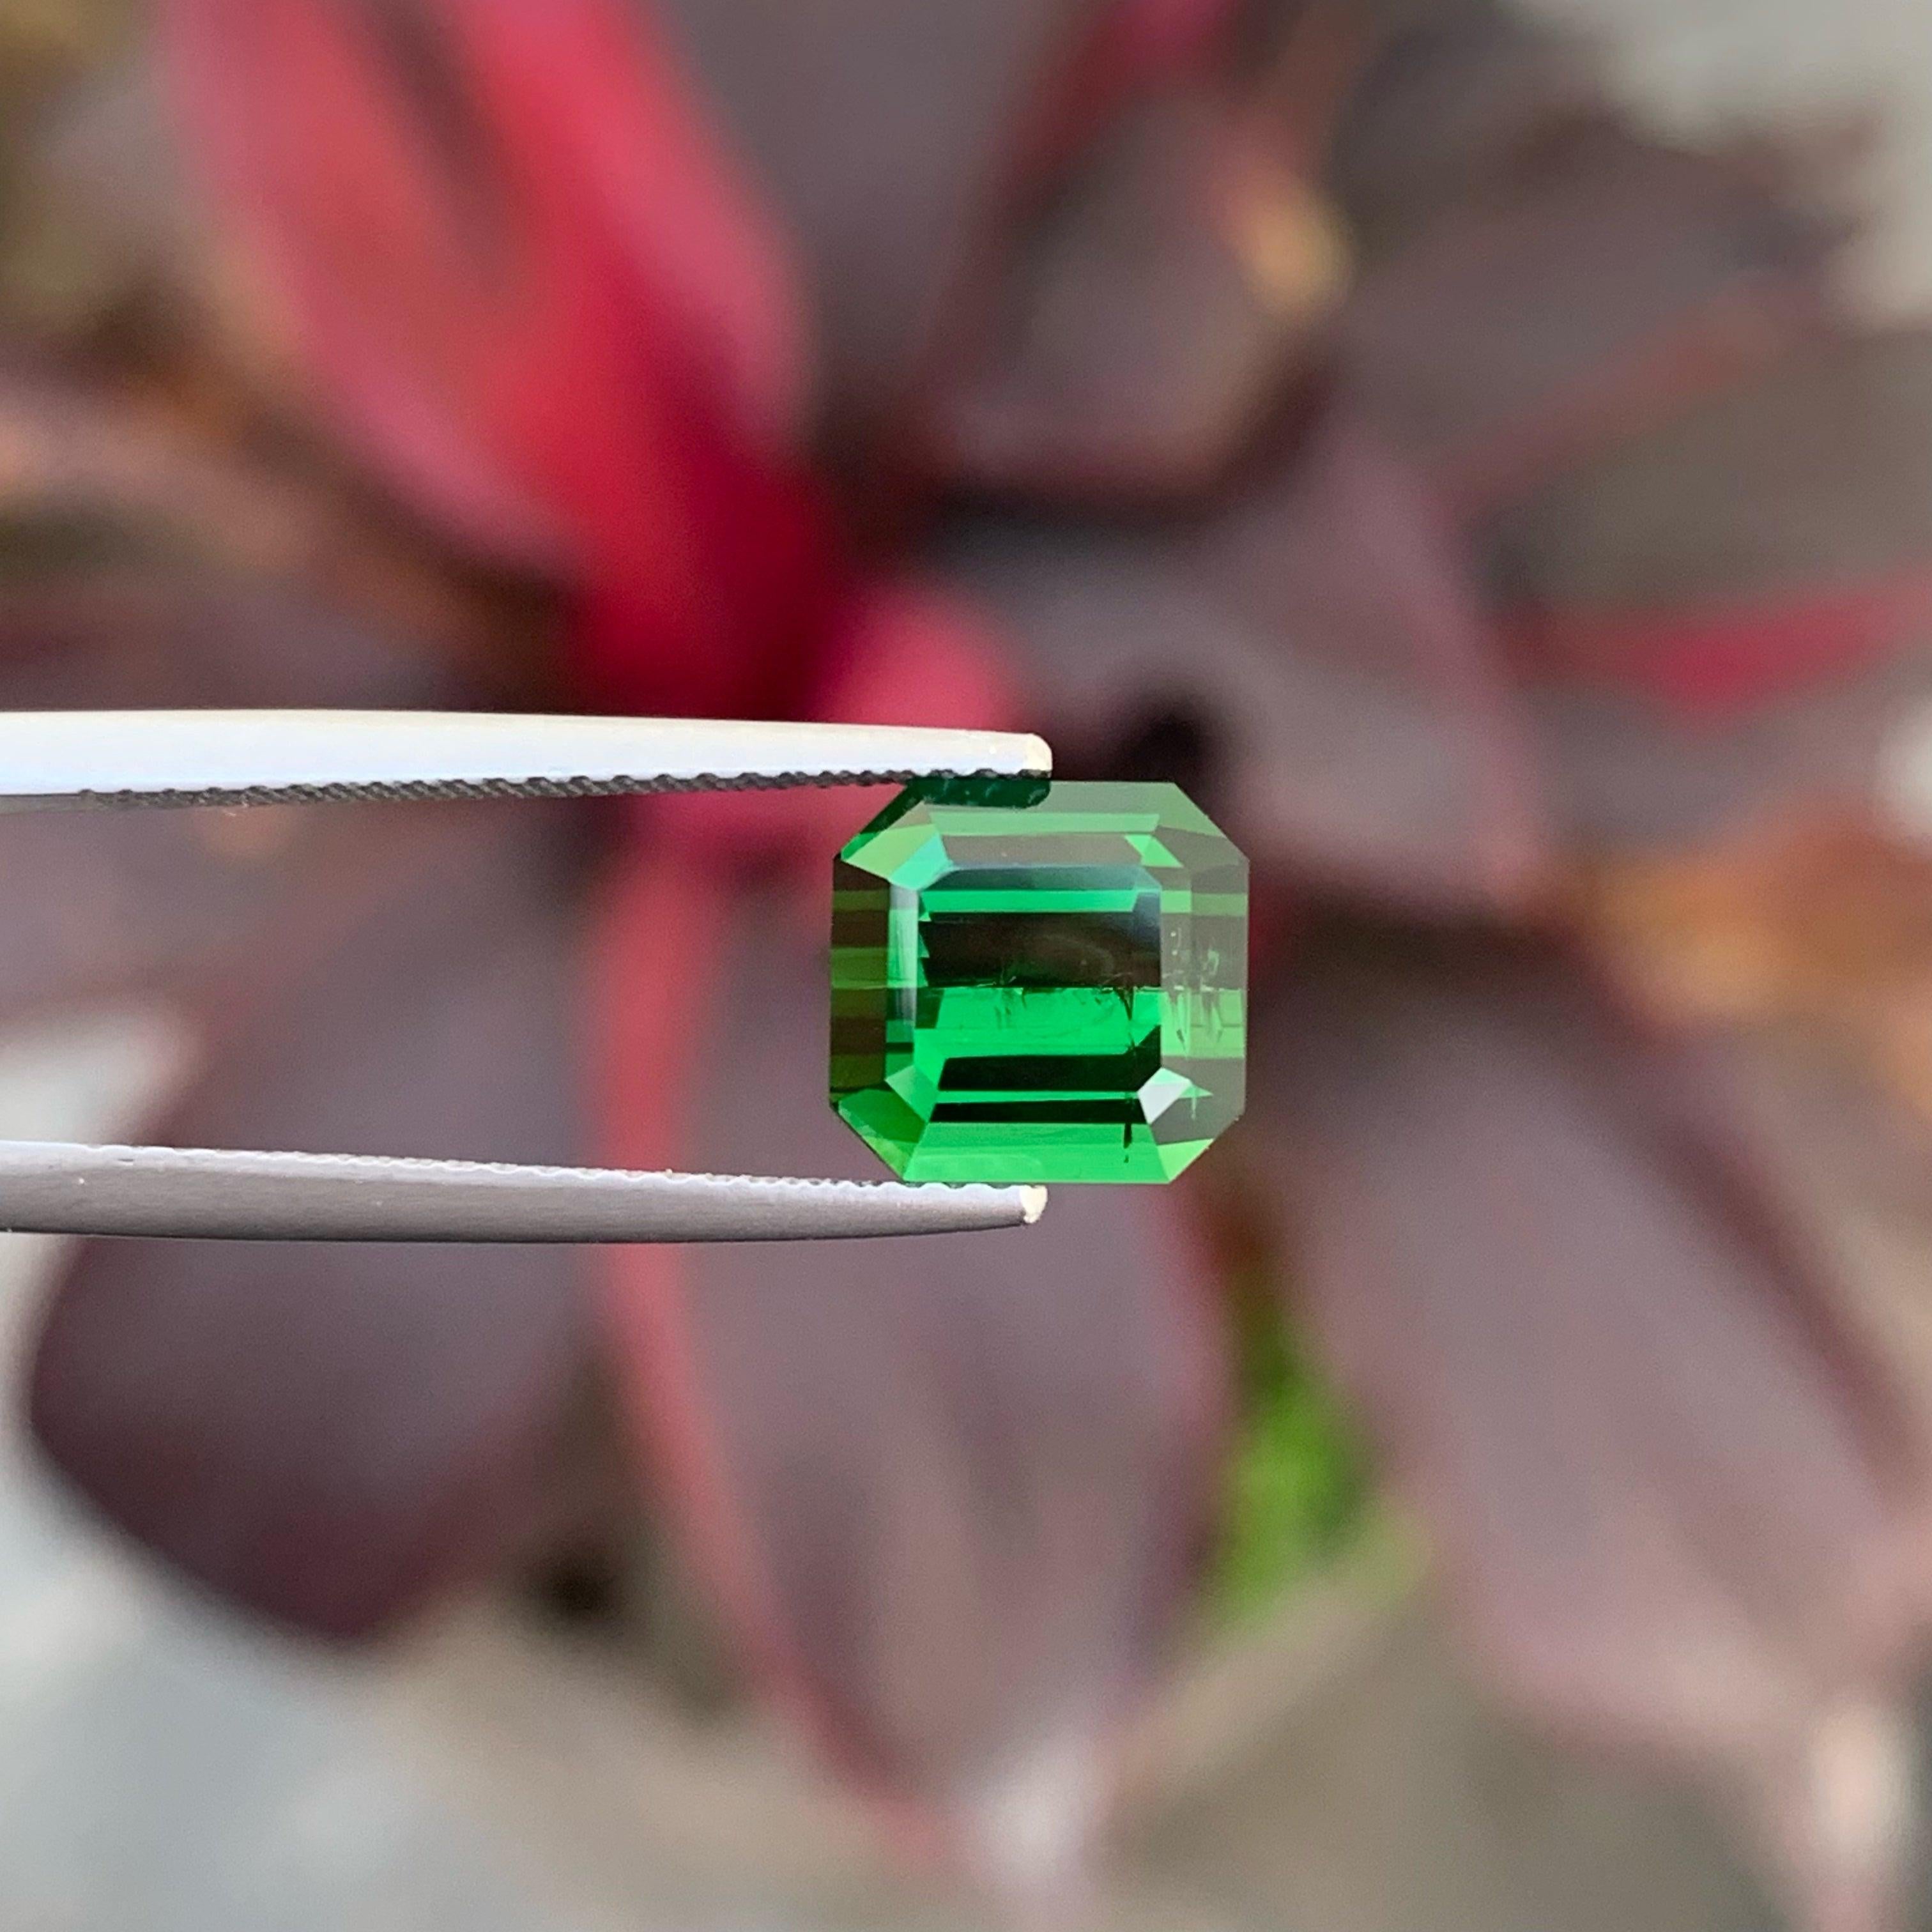 Spectacular Grass Green Tourmaline Gemstone, Available For Sale At Wholesale Price Natural High Quality 3.35 Carats SI Clarity Untreated Tourmaline From Afghanistan.

Product Information:
GEMSTONE TYPE:	Spectacular Grass Green Tourmaline